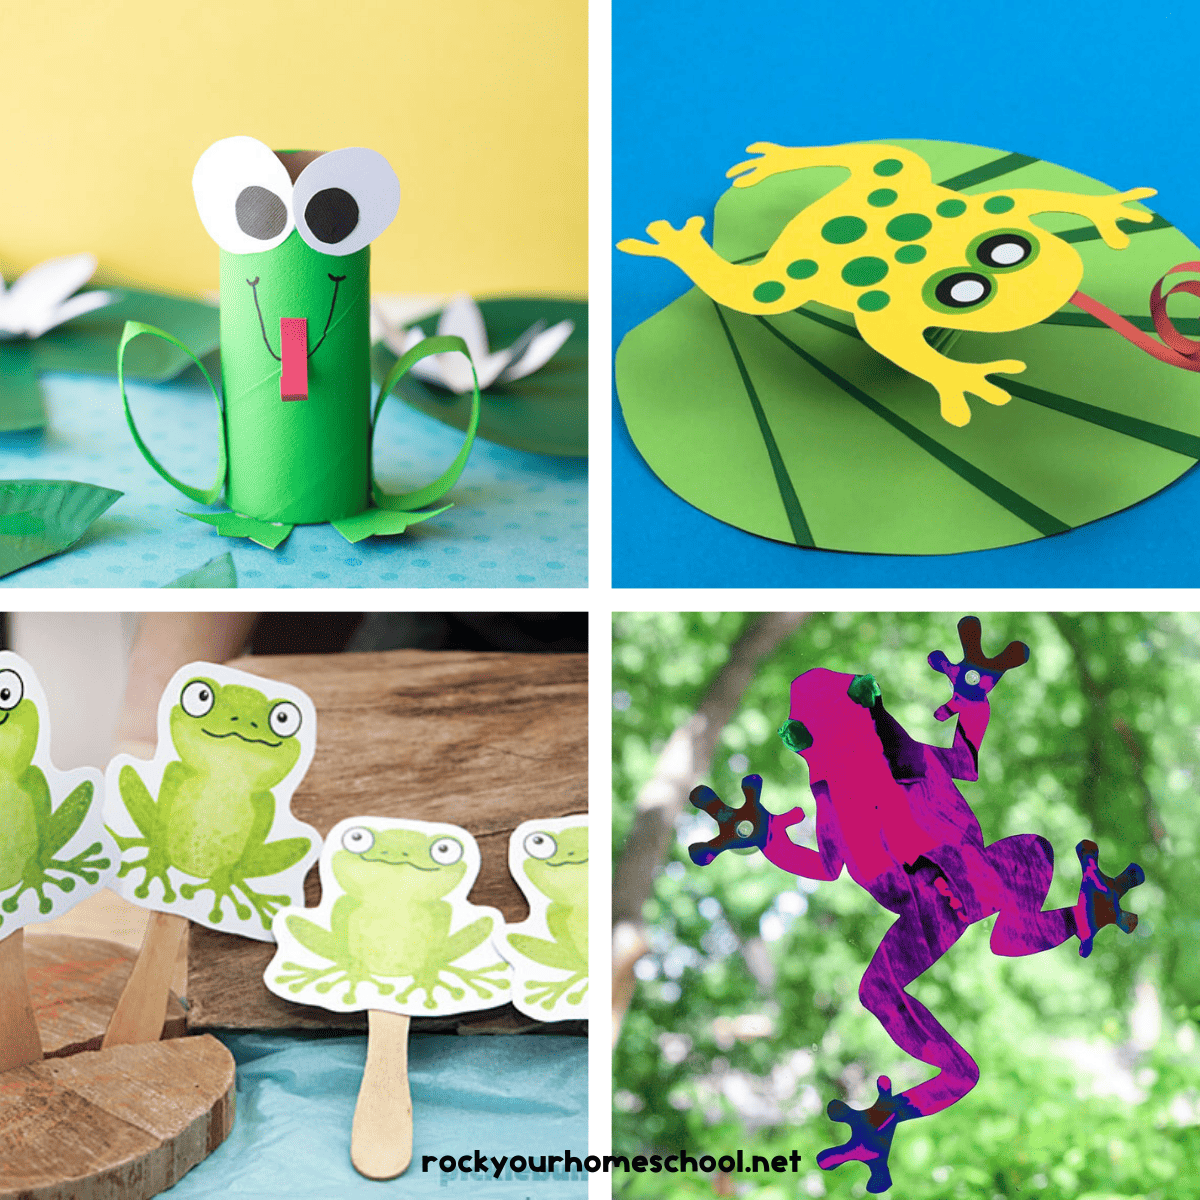 15 Fun and Easy Frog Crafts for Kids to Make and Enjoy